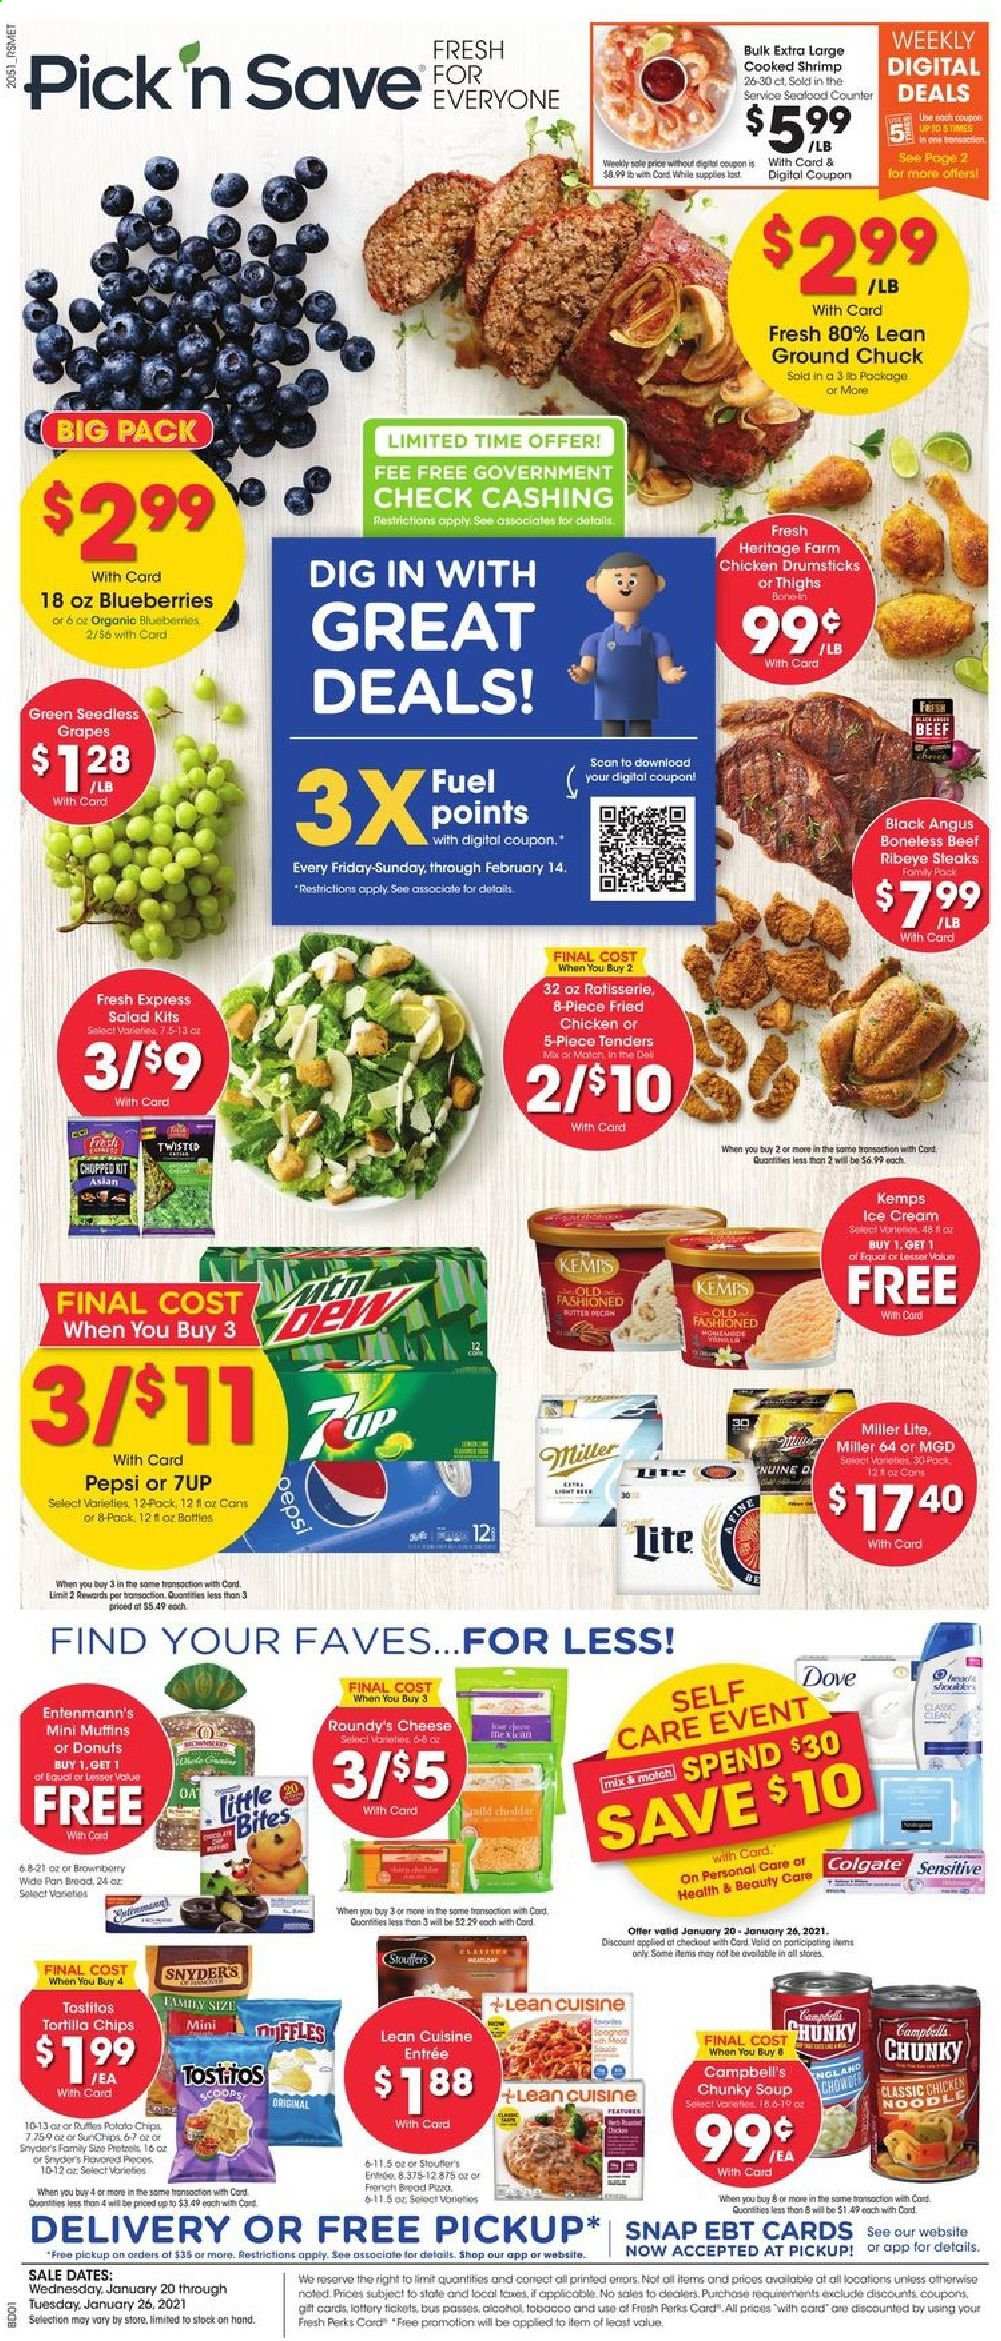 thumbnail - Pick ‘n Save Flyer - 01/20/2021 - 01/26/2021 - Sales products - blueberries, seedless grapes, bread, donut, muffin, Entenmann's, Little Bites, shrimps, Campbell's, soup, salad, fried chicken, Lean Cuisine, cheddar, cheese, Kemps, butter, ice cream, tortilla chips, chips, Tostitos, Pepsi, 7UP, alcohol, beer, Miller Lite, Coors, chicken drumsticks, beef meat, ground chuck, steak, ribeye steak, Dove, Colgate, pan, grapes. Page 1.